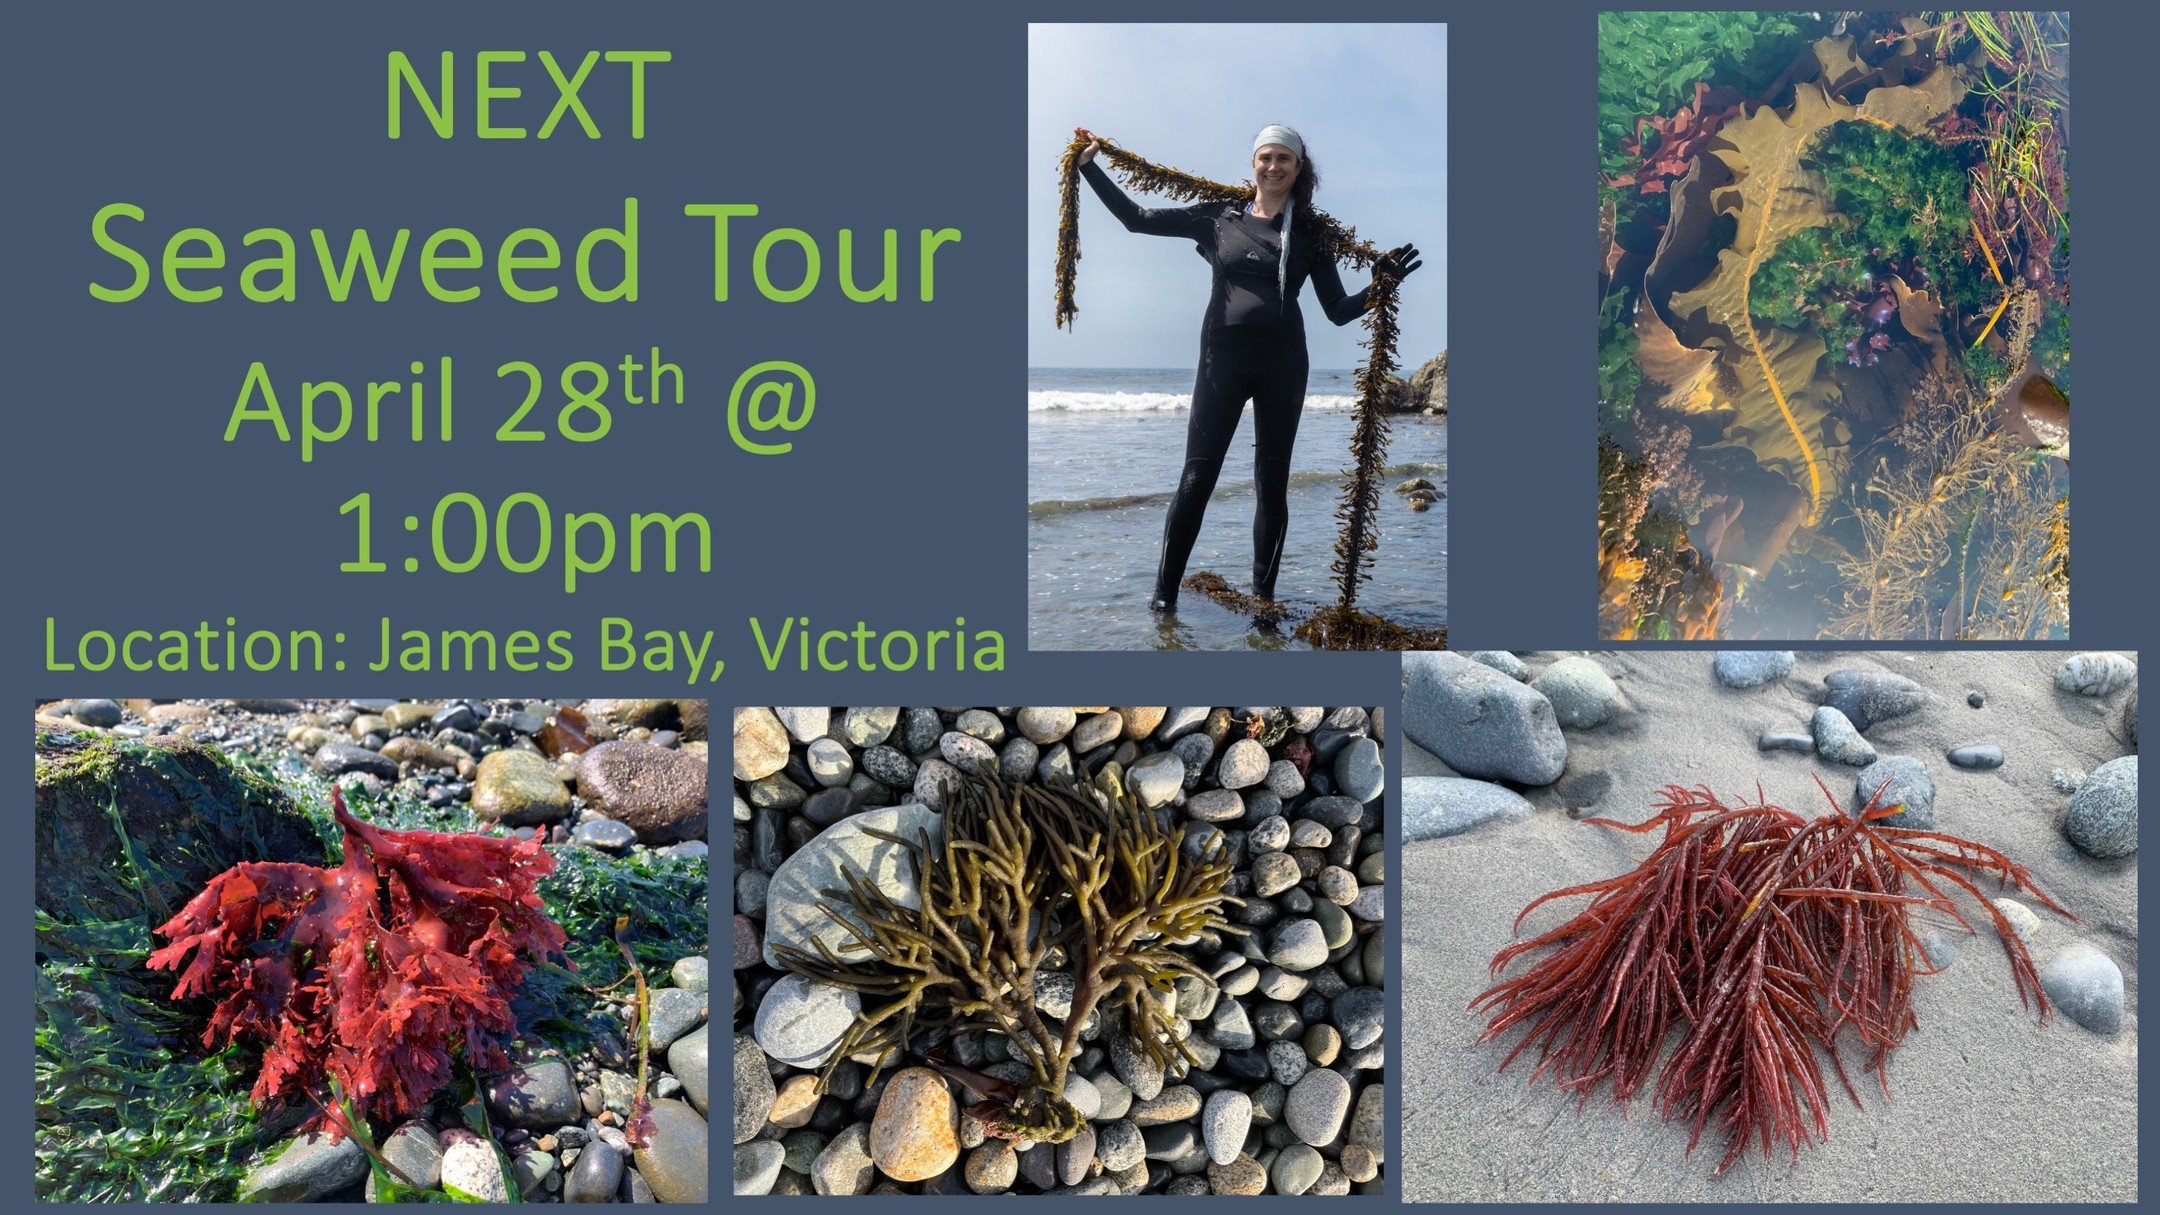 Reds, greens, browns! It's spring and the seaweeds are back! If you are interested in learning about some of the estimated 650 species we have here in the Pacific Northwest, please join me on Sunday April 28th in Victoria. Learn which seaweeds are ed